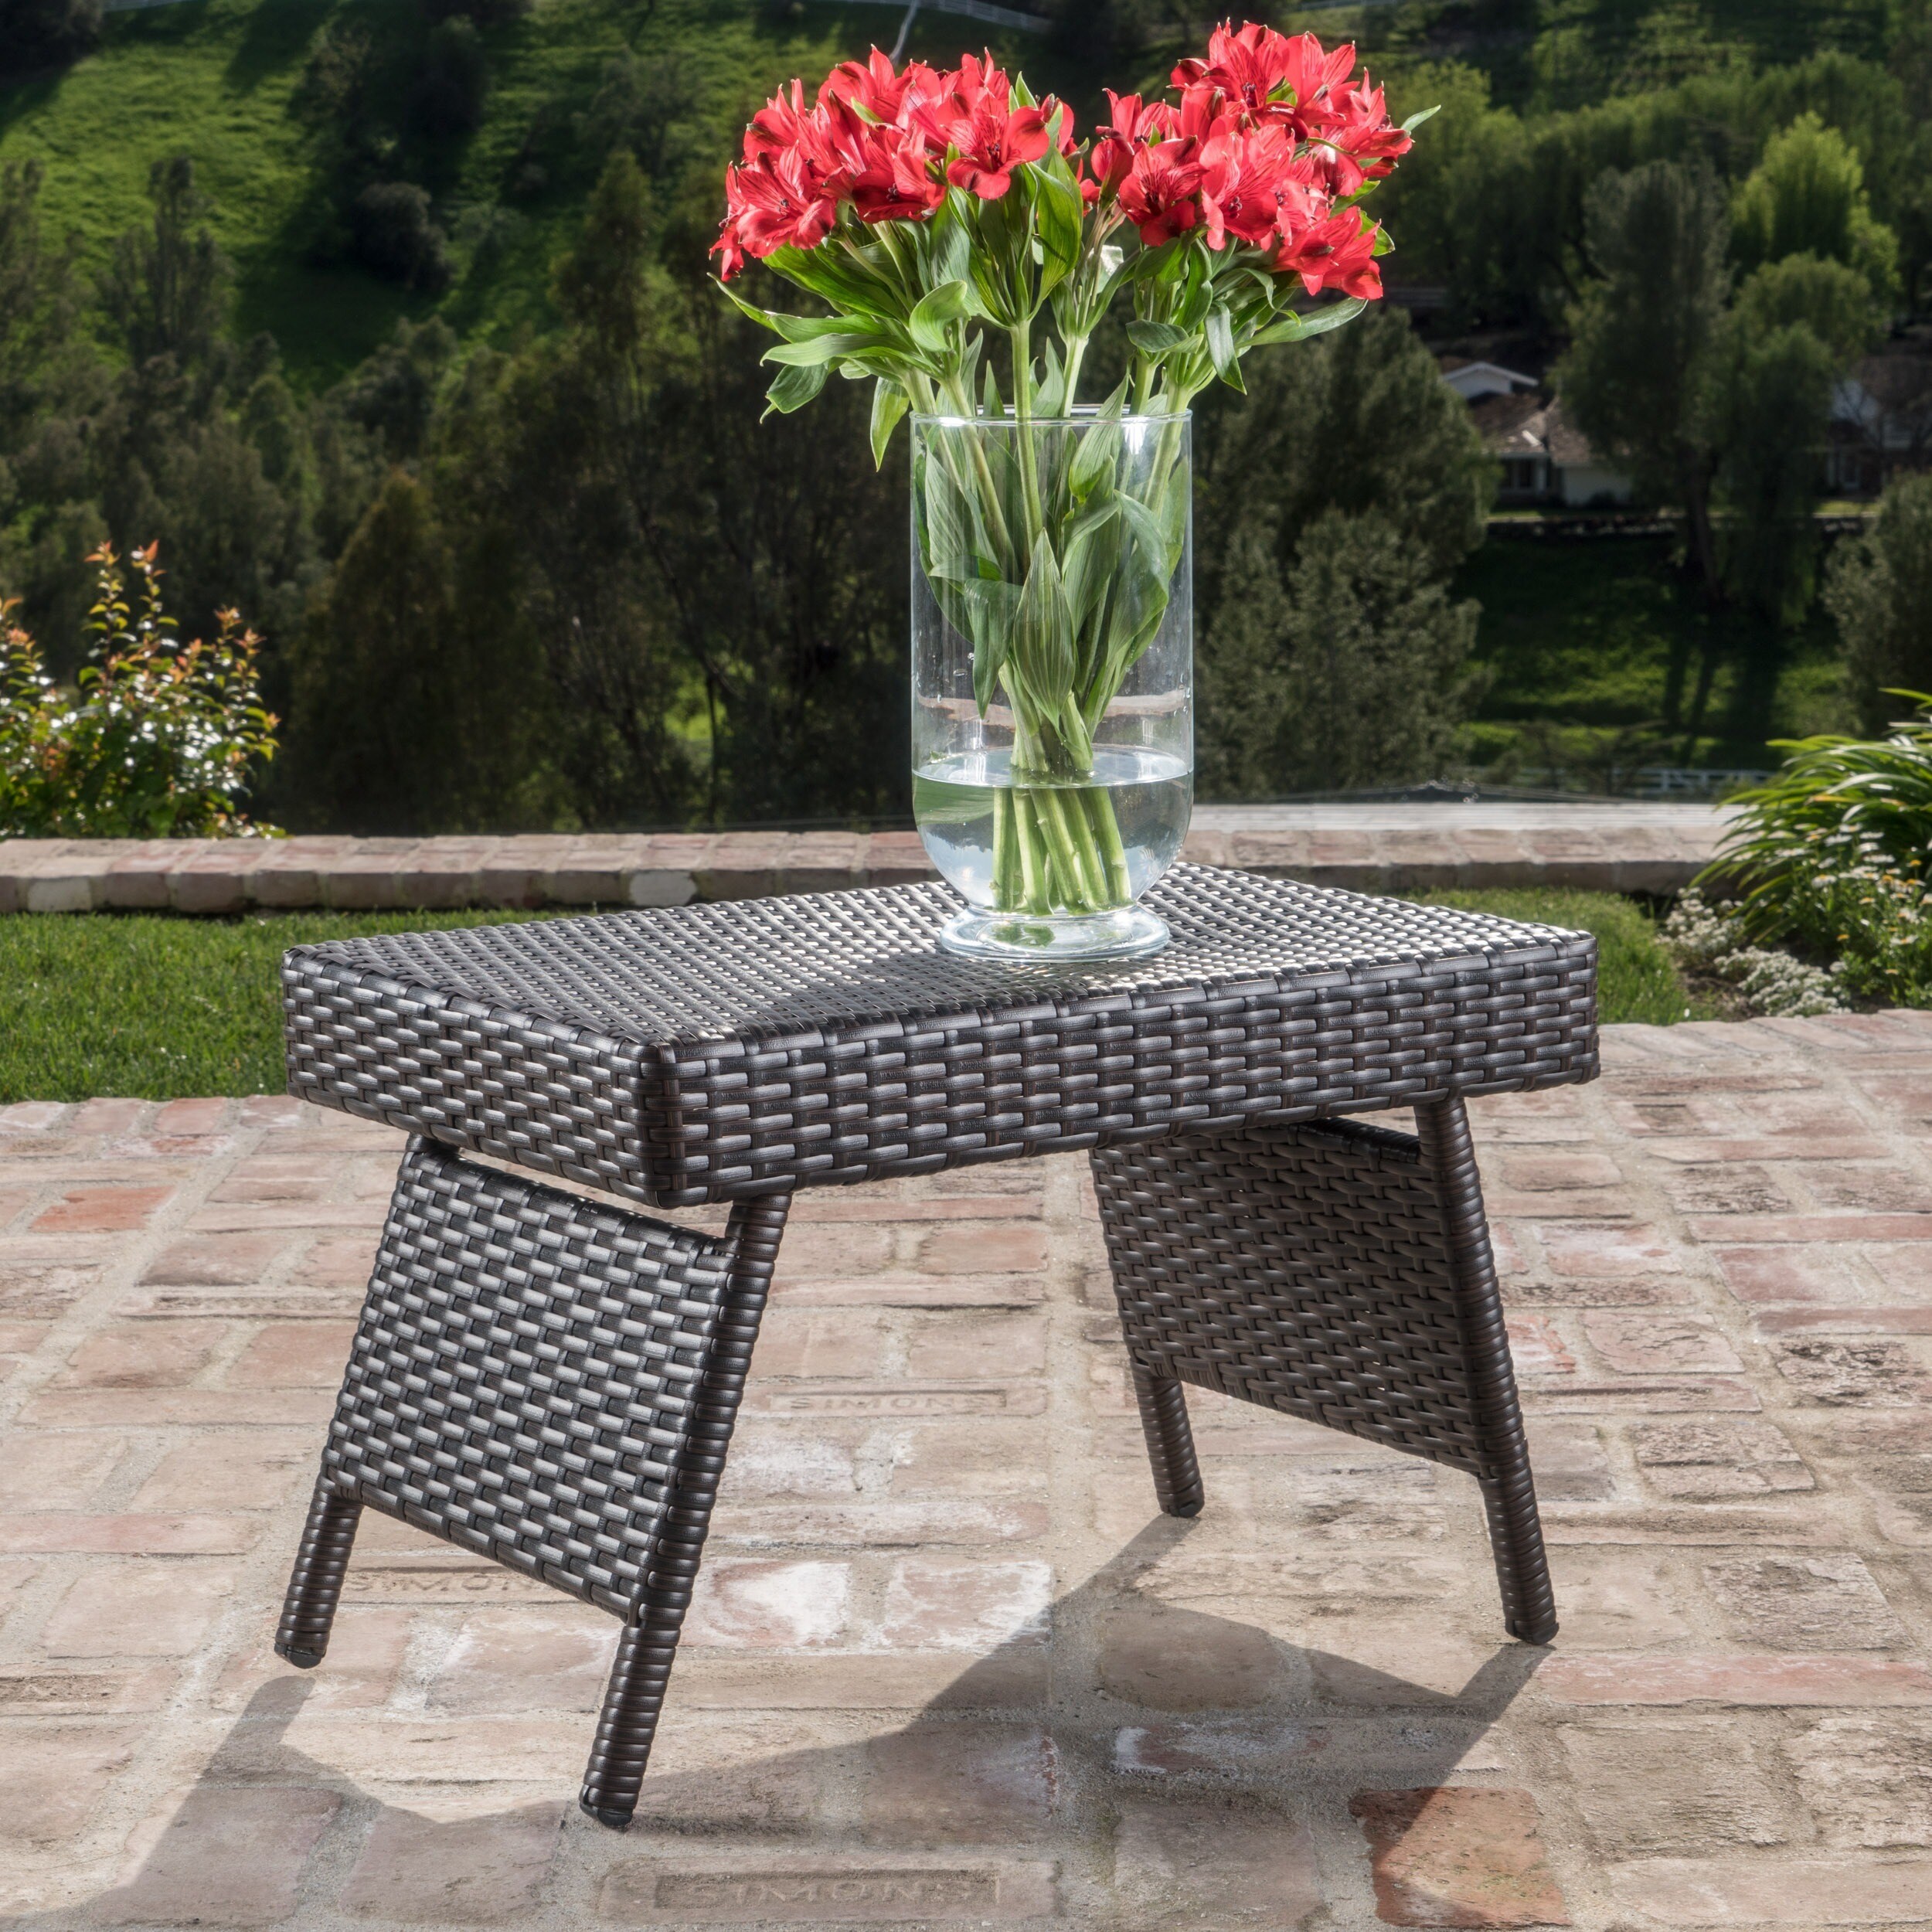 Thira Outdoor Wicker End Table - image 2 of 5